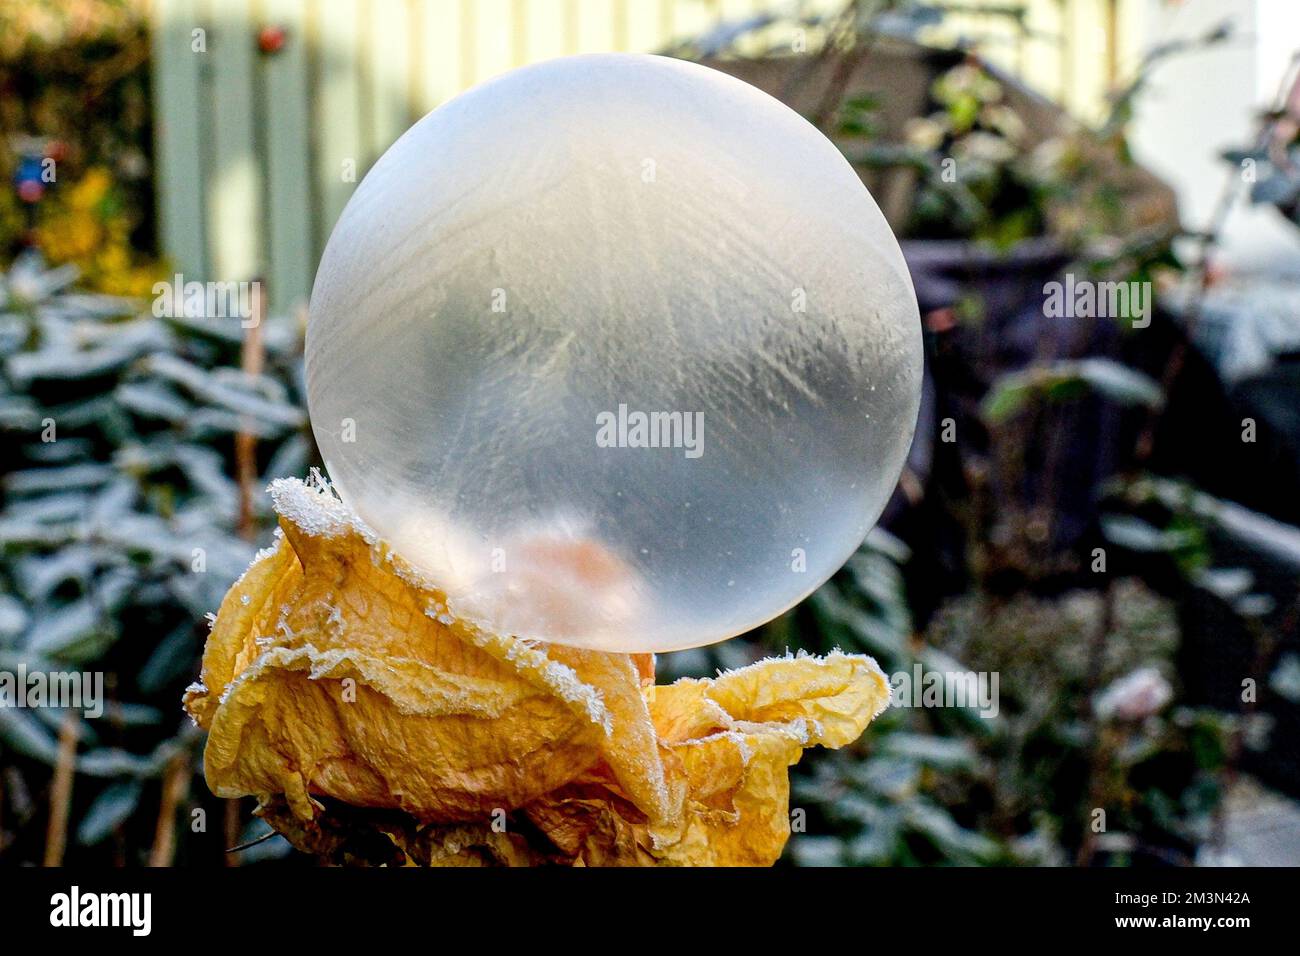 Frozen Ice bubble blown onto plant leaves and flowers Stock Photo